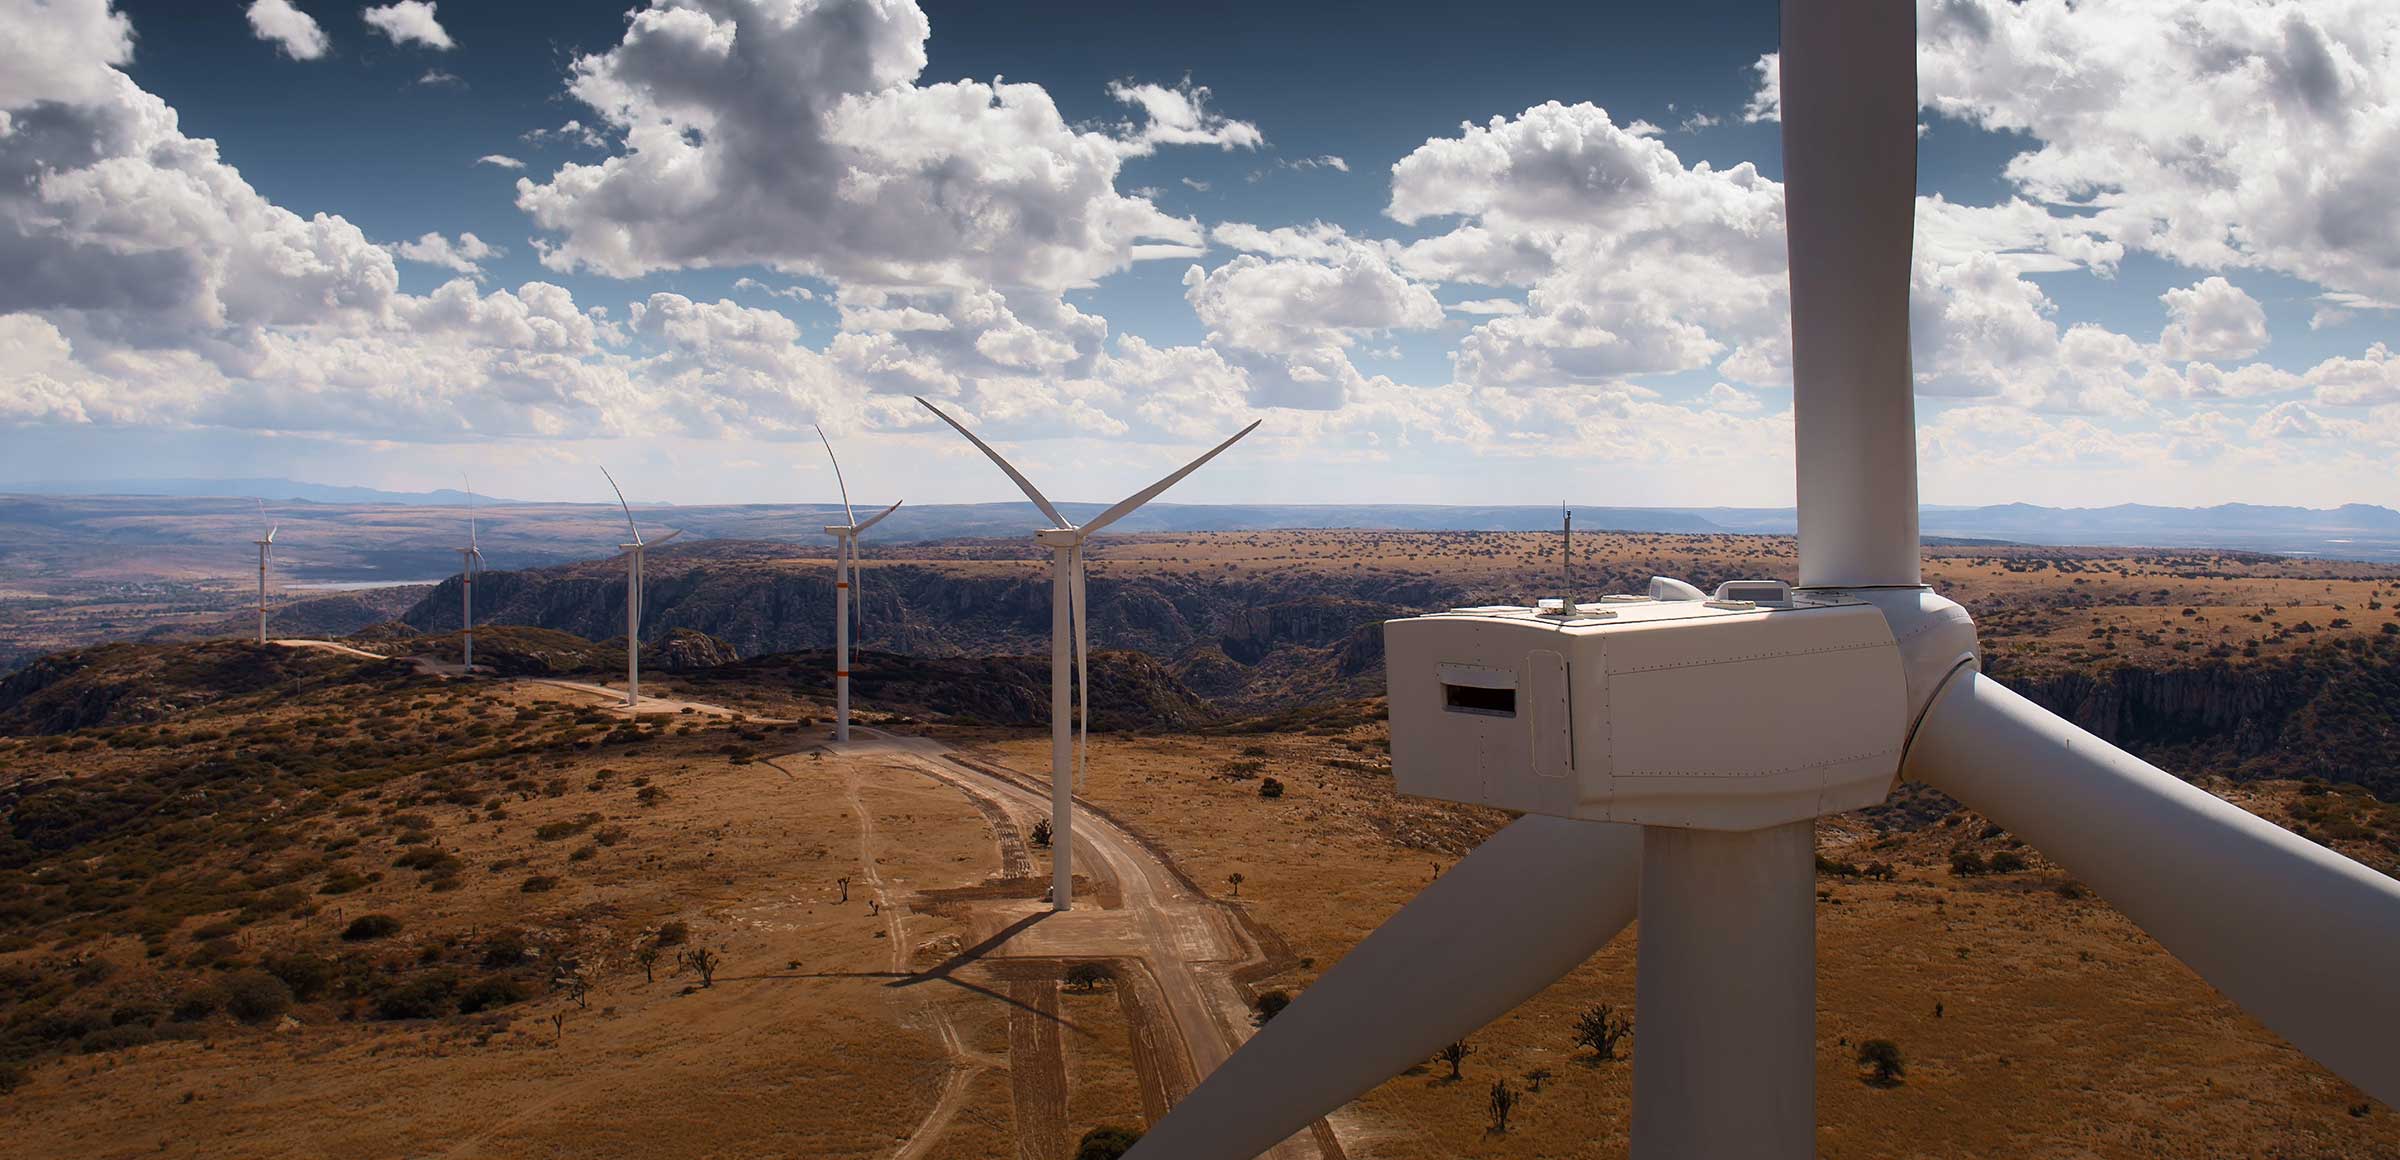 Bloomberg New Energy Outlook 2019: Wind and Solar will be main sources